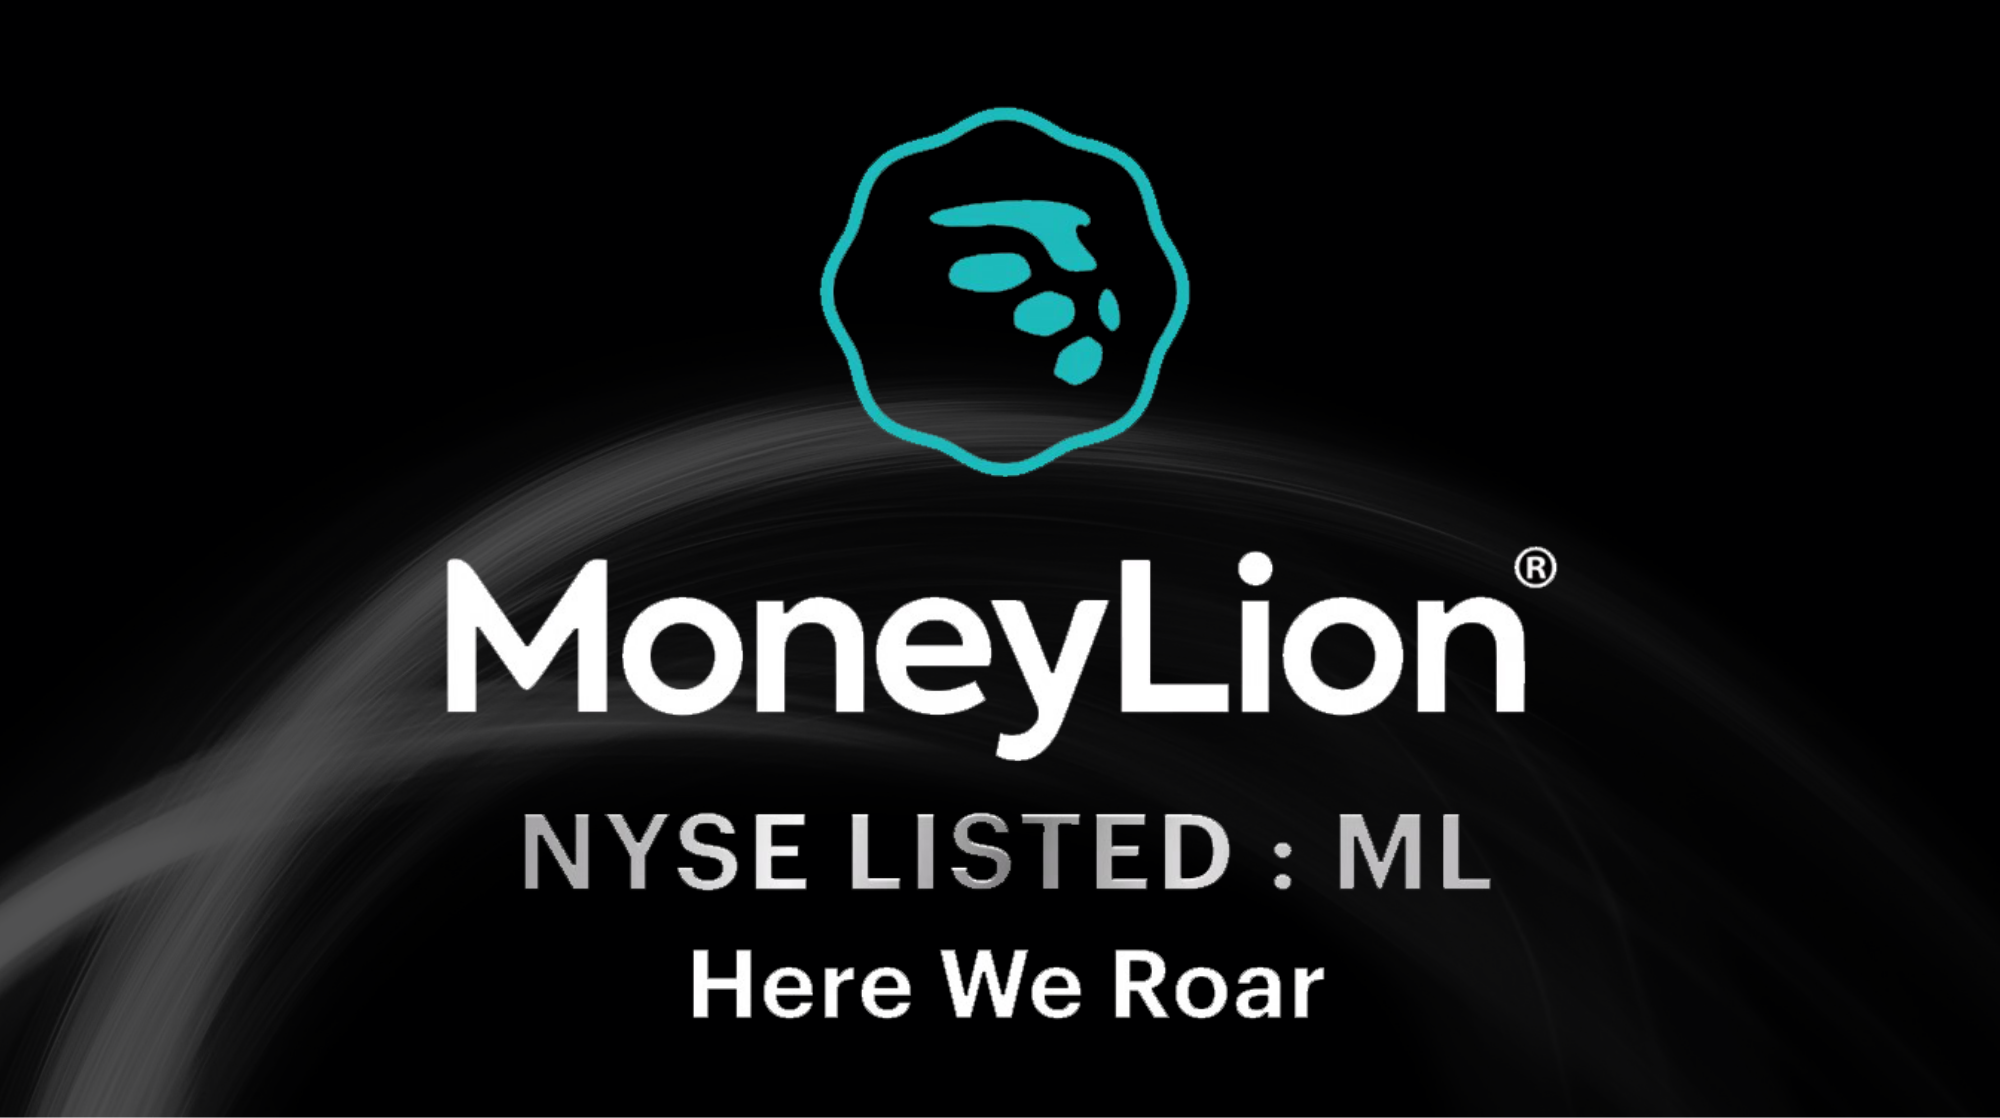 MoneyLion’s Evolution from Financial App to Daily Destination & Marketplace